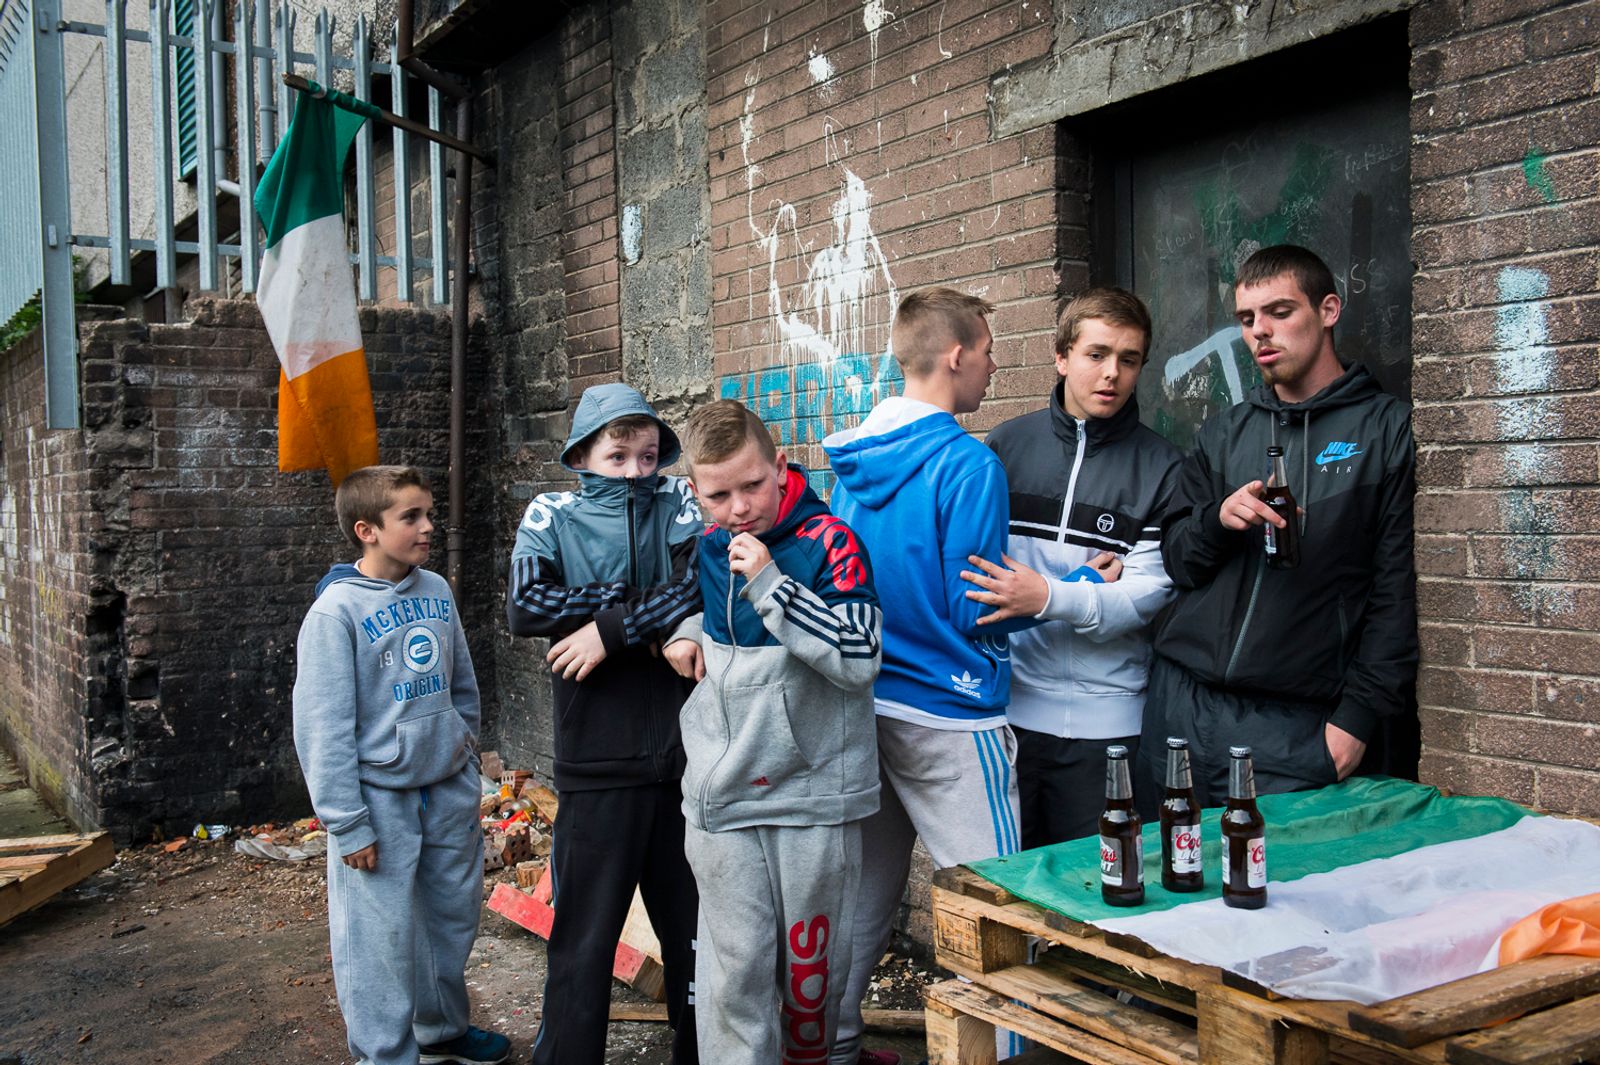 © Marika Dee - Surrounded by Irish flags, teenagers hang out in the Catholic New Lodge area of north Belfast.